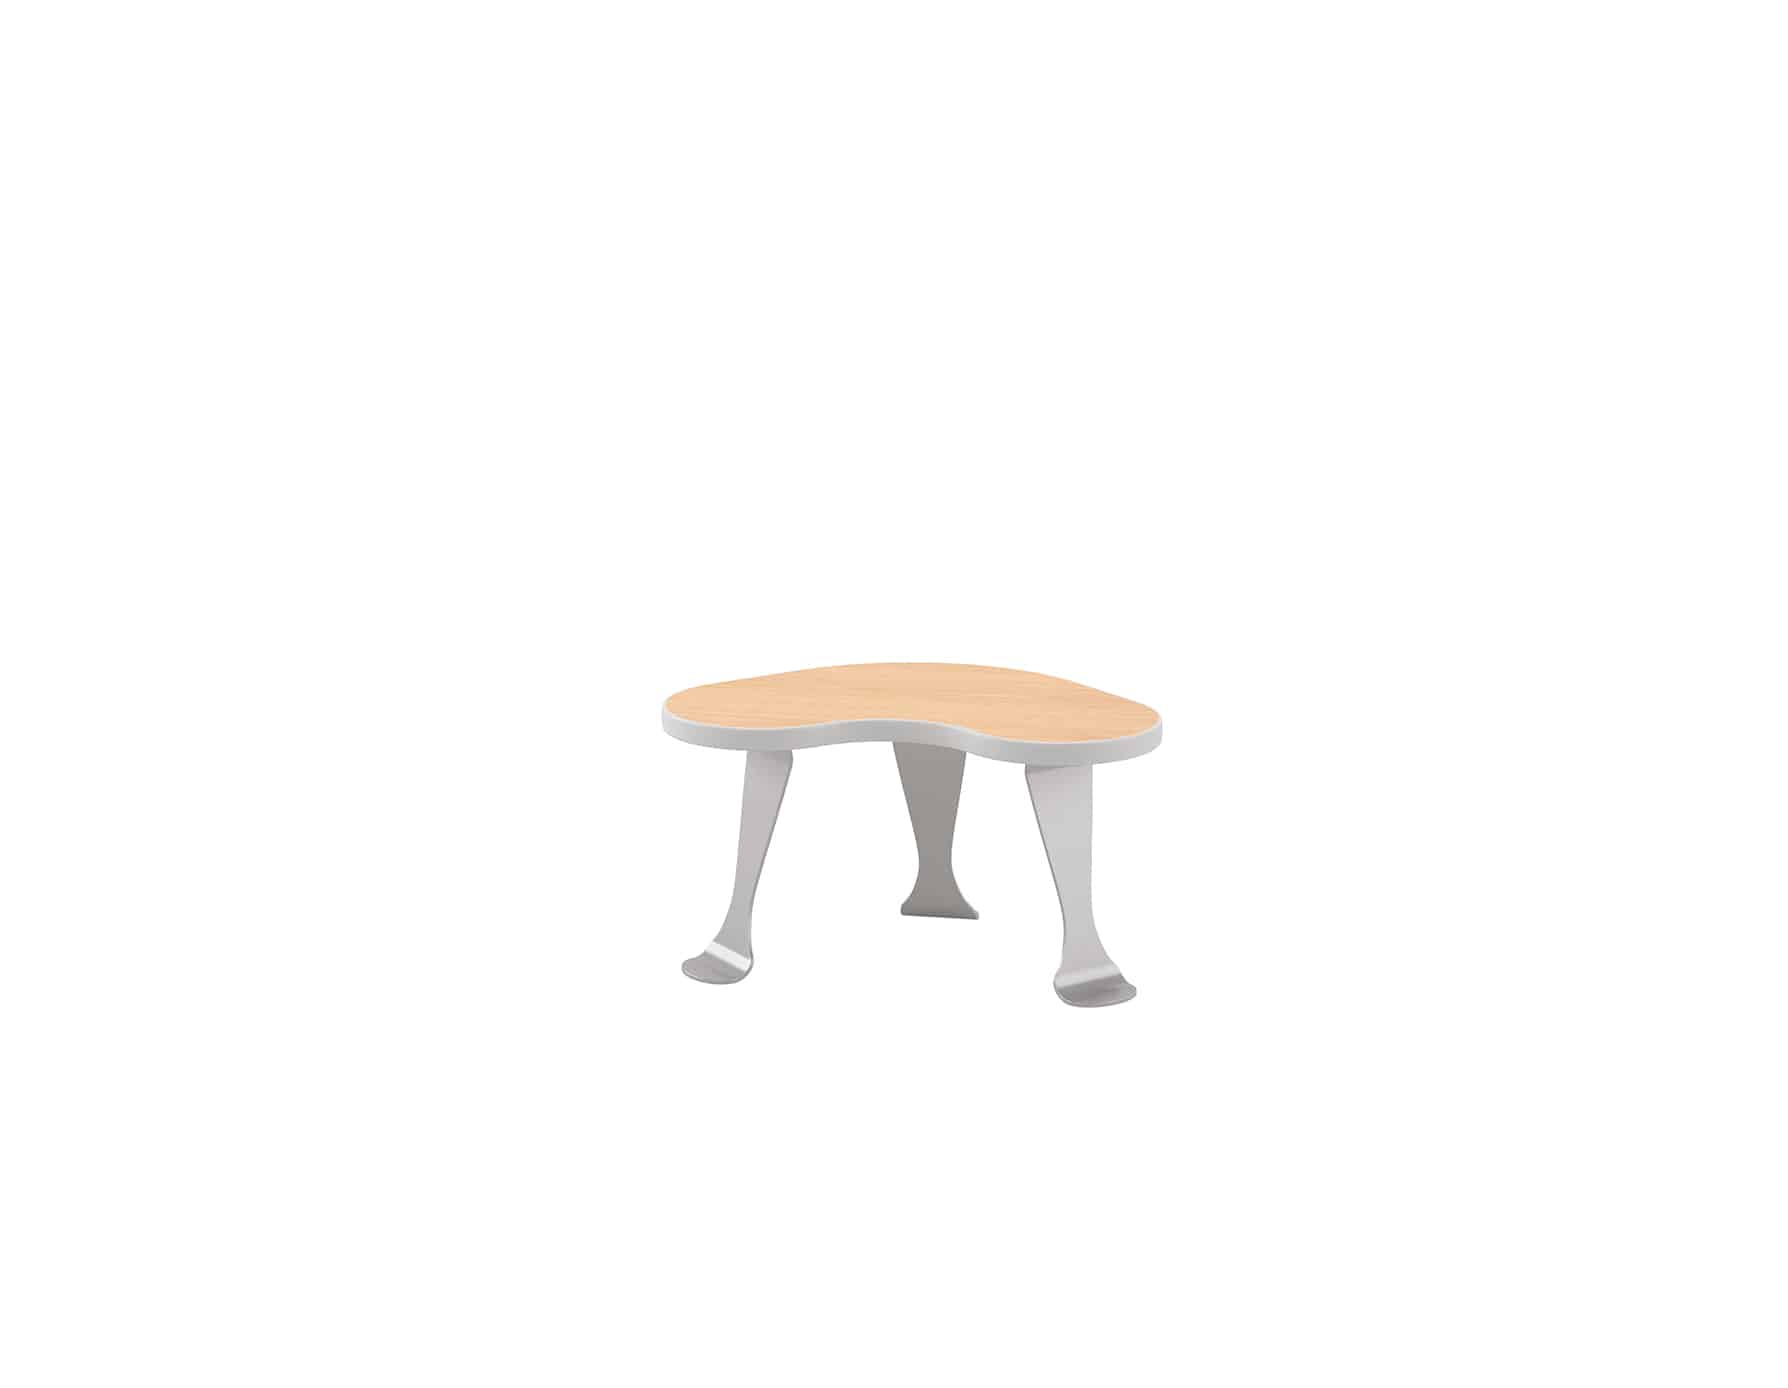 804020 Sprout Children's Stool